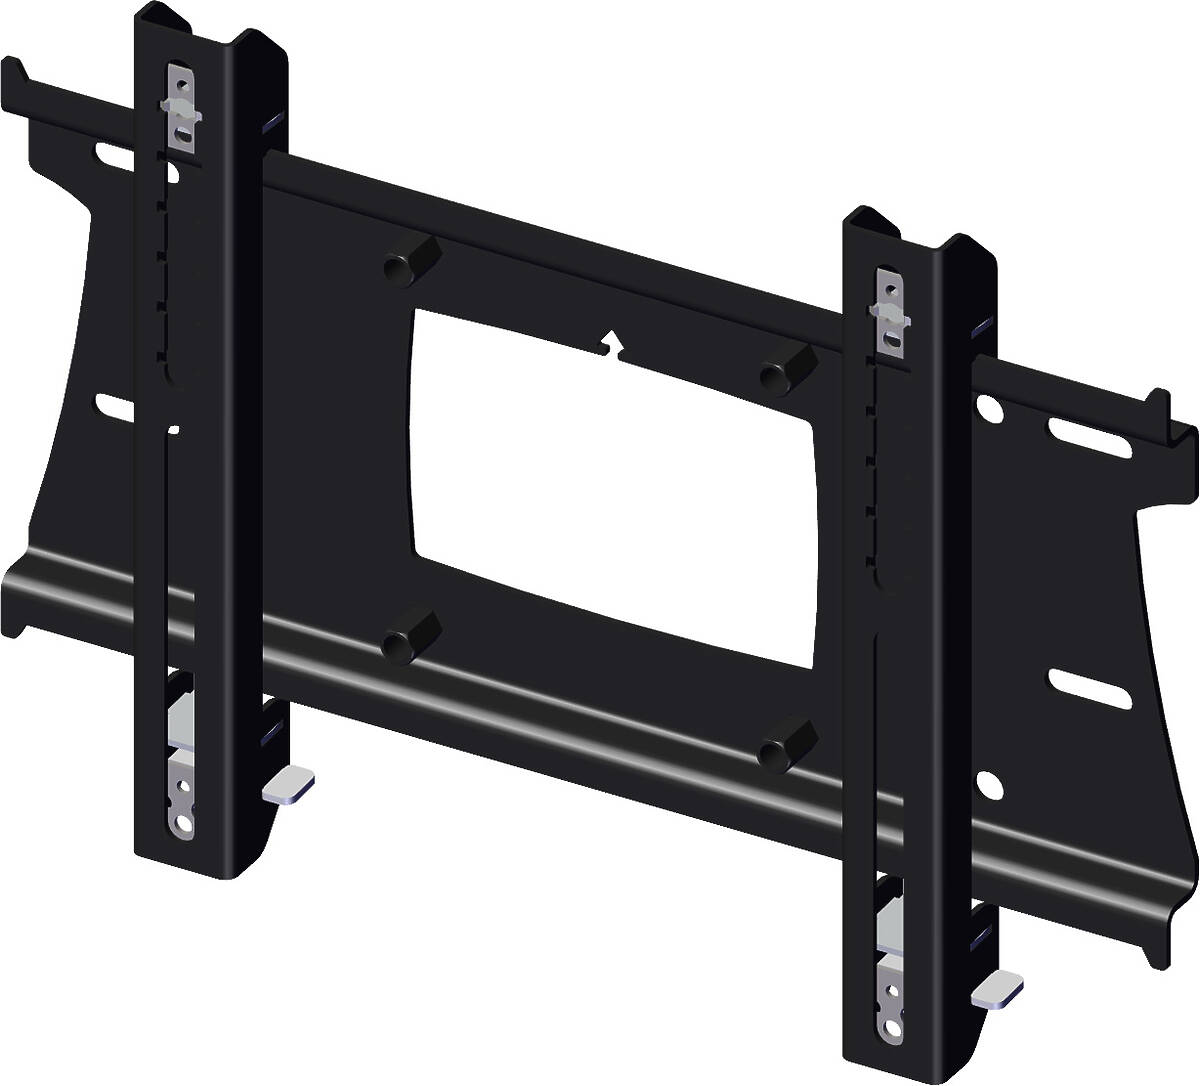 Unicol PZX0 Pozimount VESA wall mount for monitors and TVs from 30 to 40 inches product image. Click to enlarge.